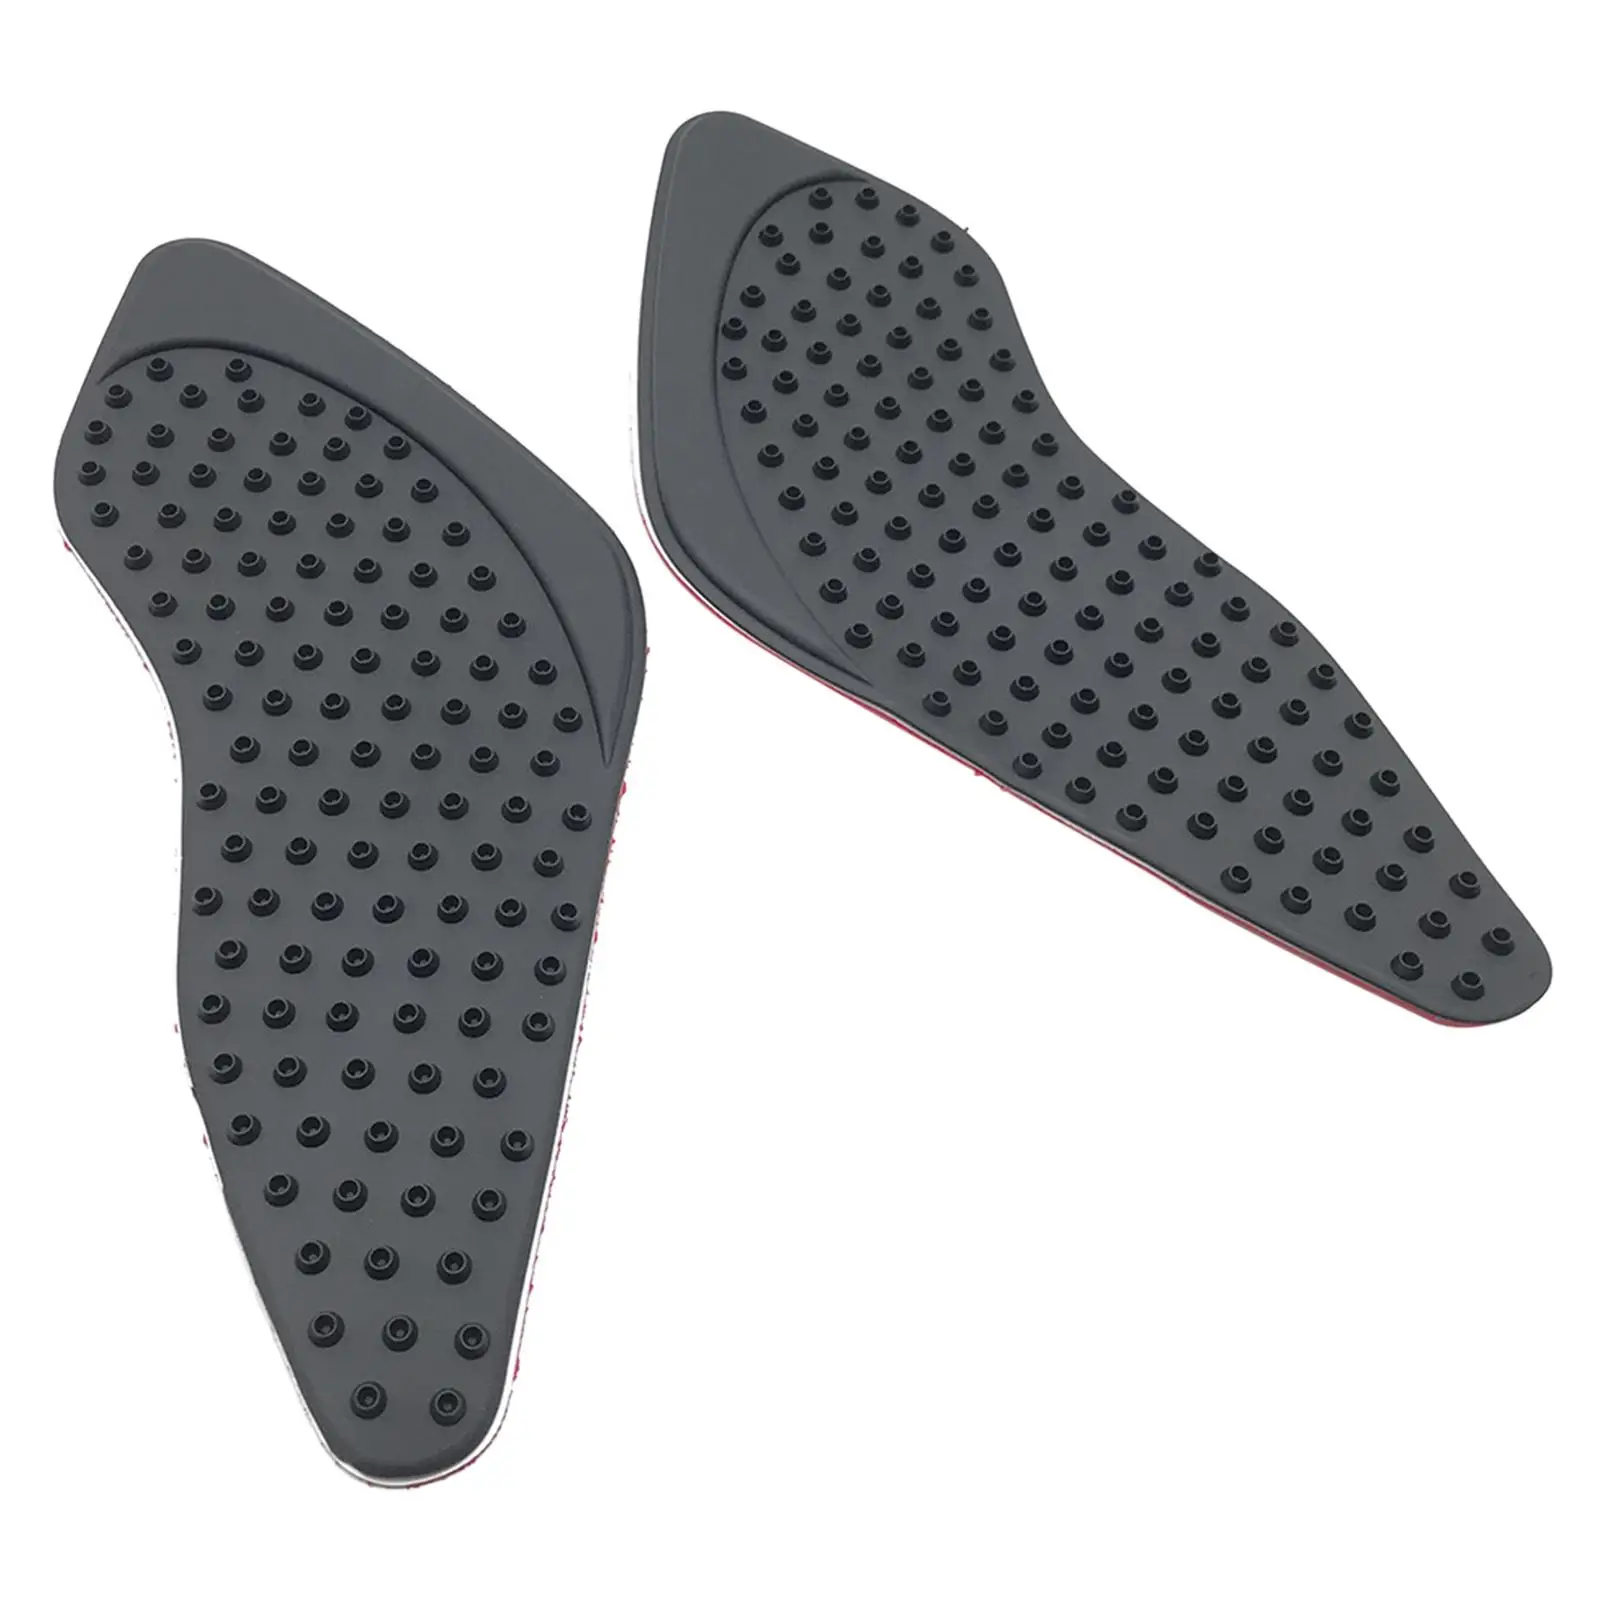 2x Motorcycle Fuel  Spare  Fuel Tank Traction Pad for  0  1992-2018 Durable Easy to Install